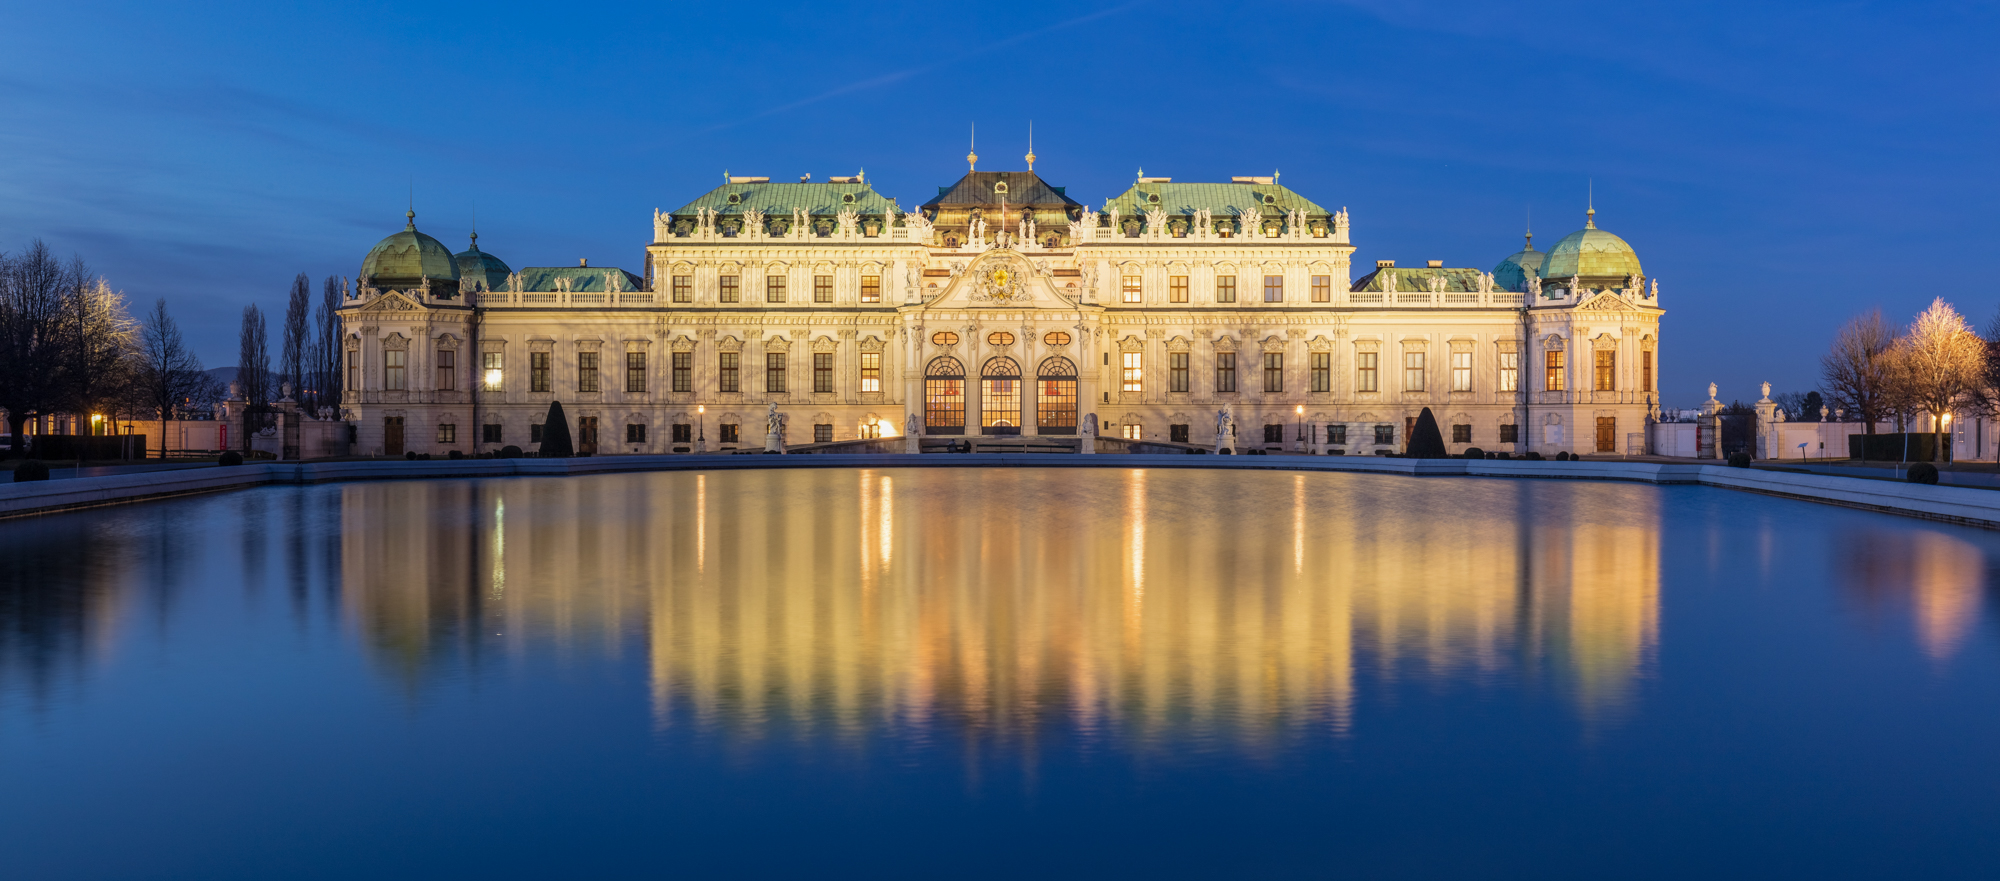 View of the Upper Belvedere Palace during the blue hour, Vienna, Austria.